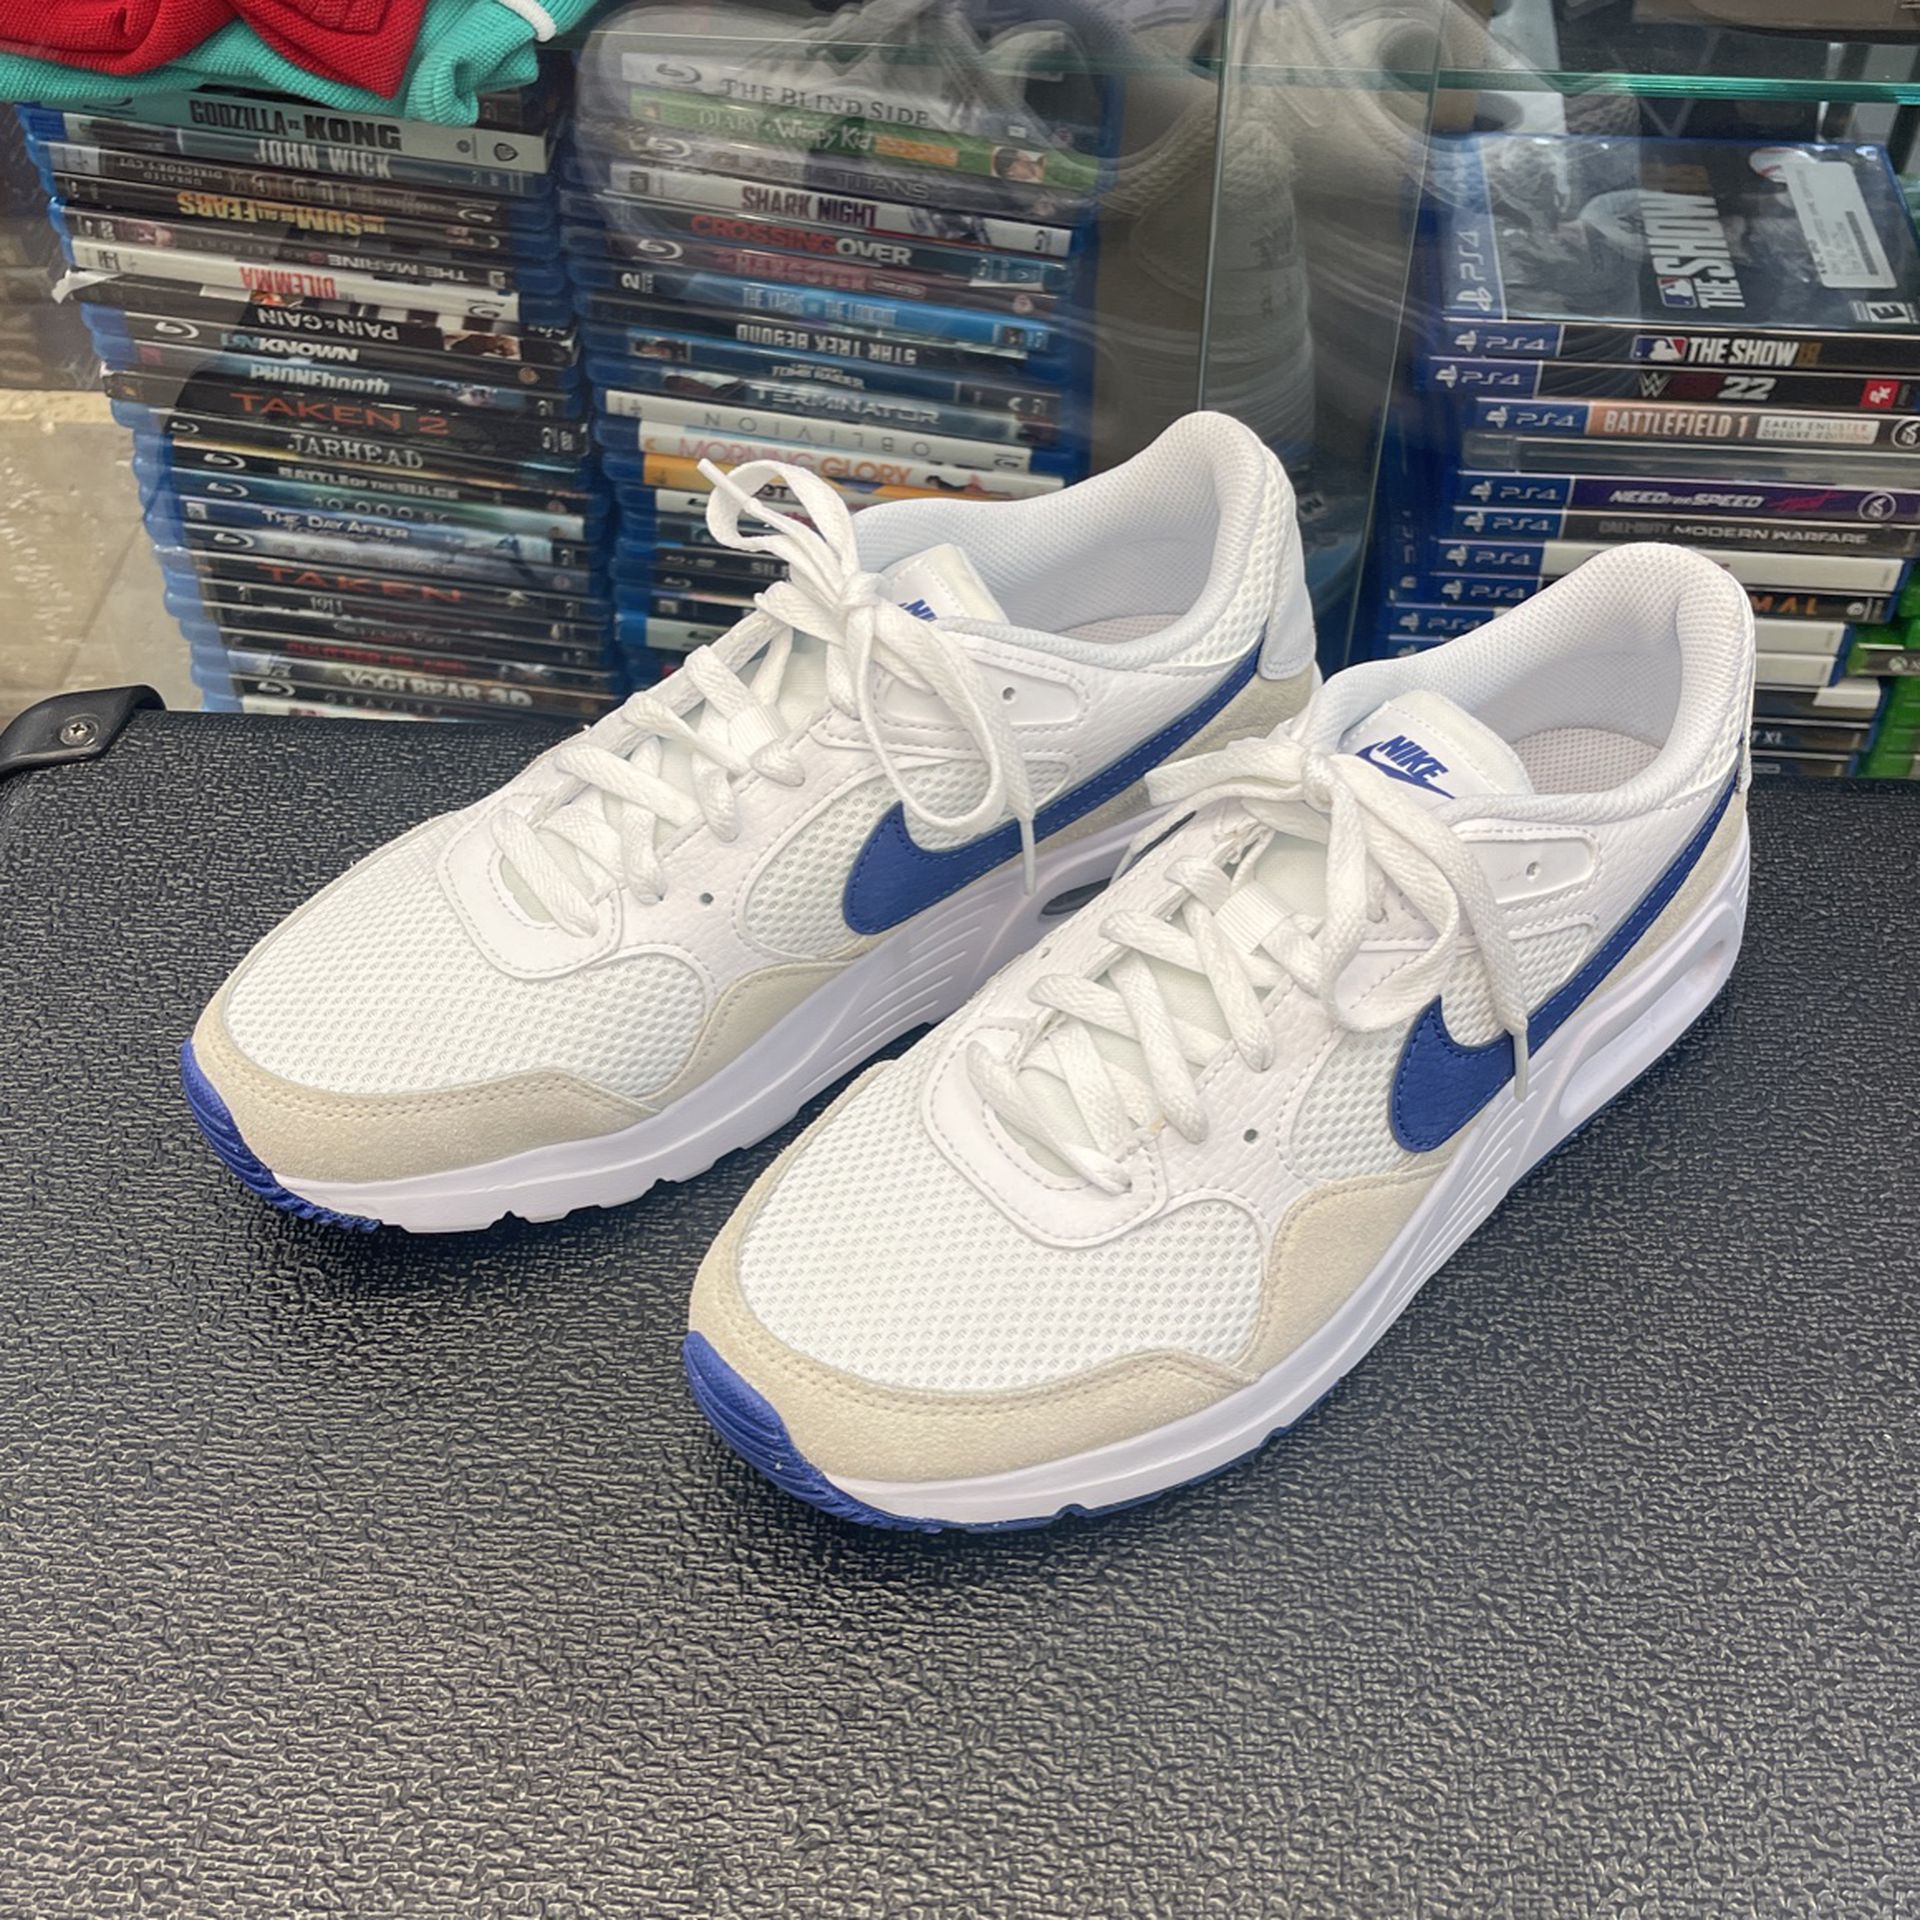 Clearance Women's Nike Air Max Shoes.